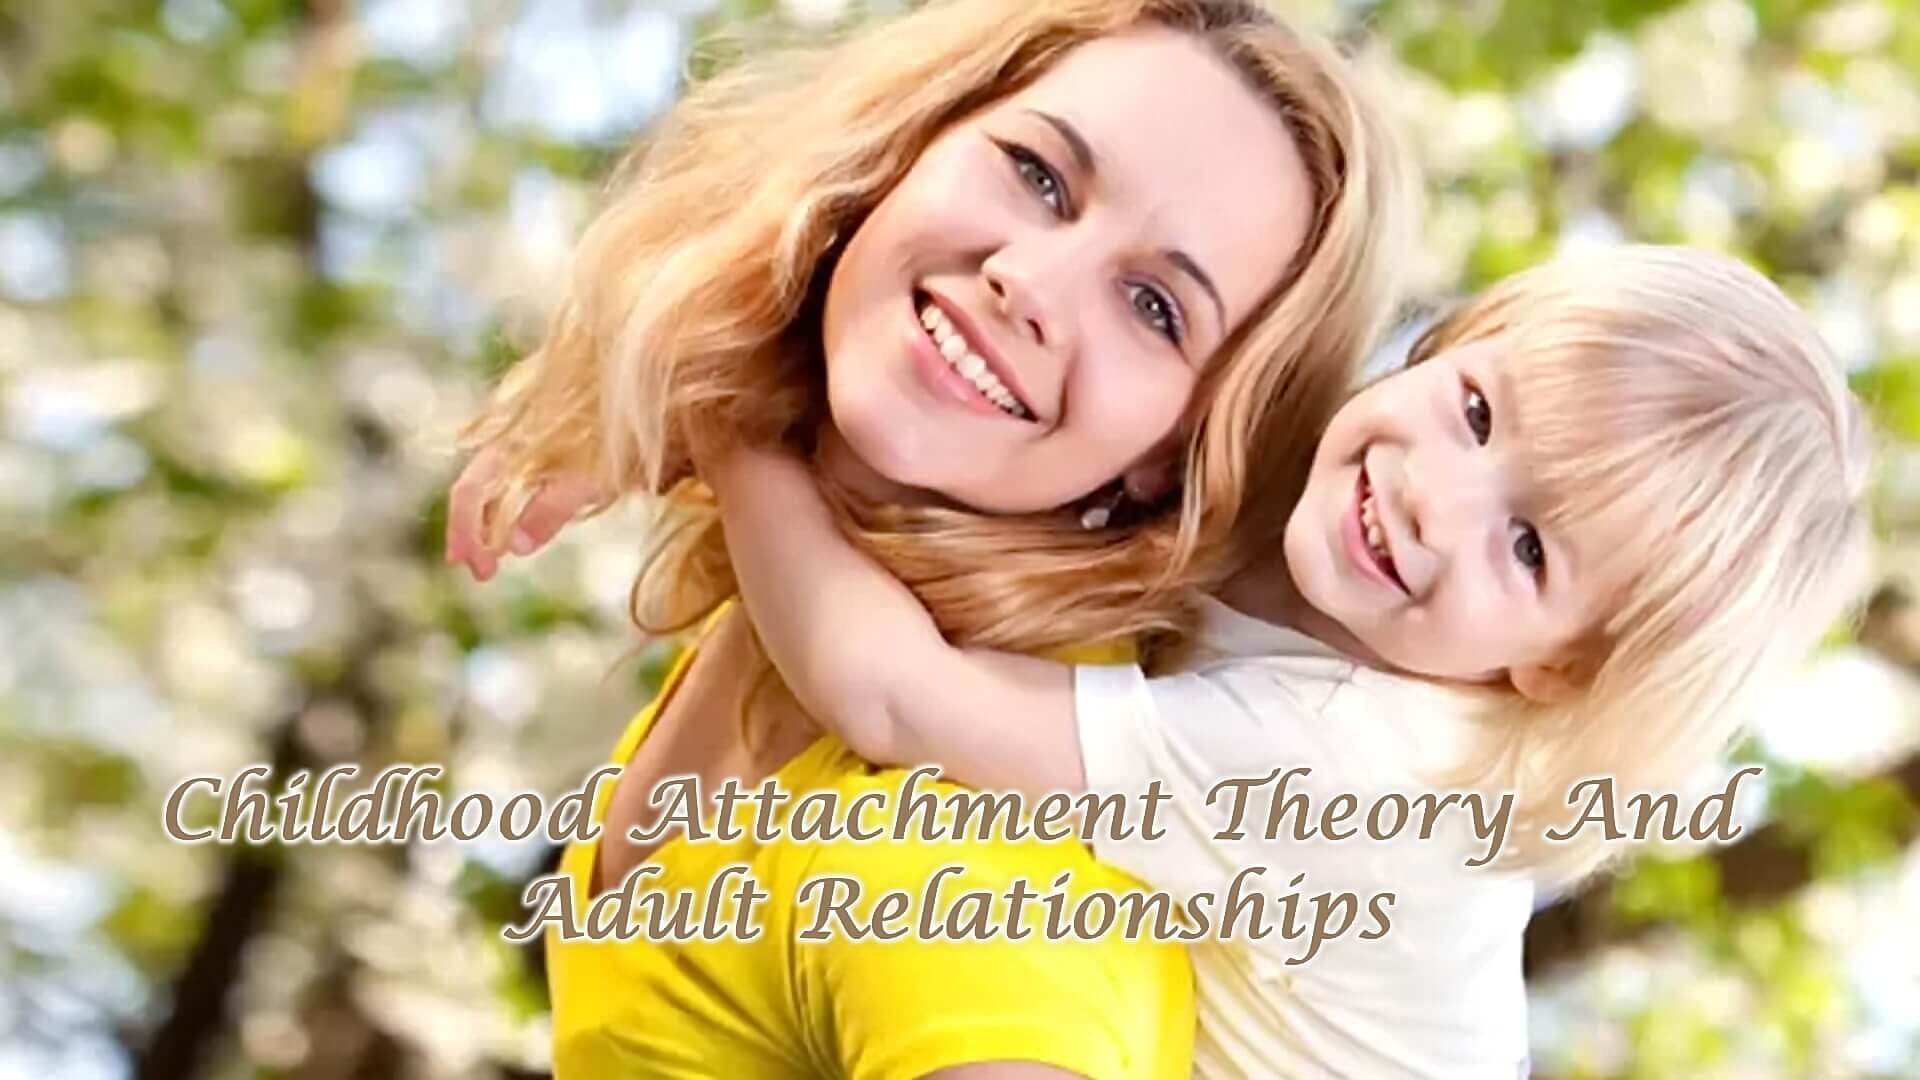 Childhood Attachment Theory And Adult Relationships